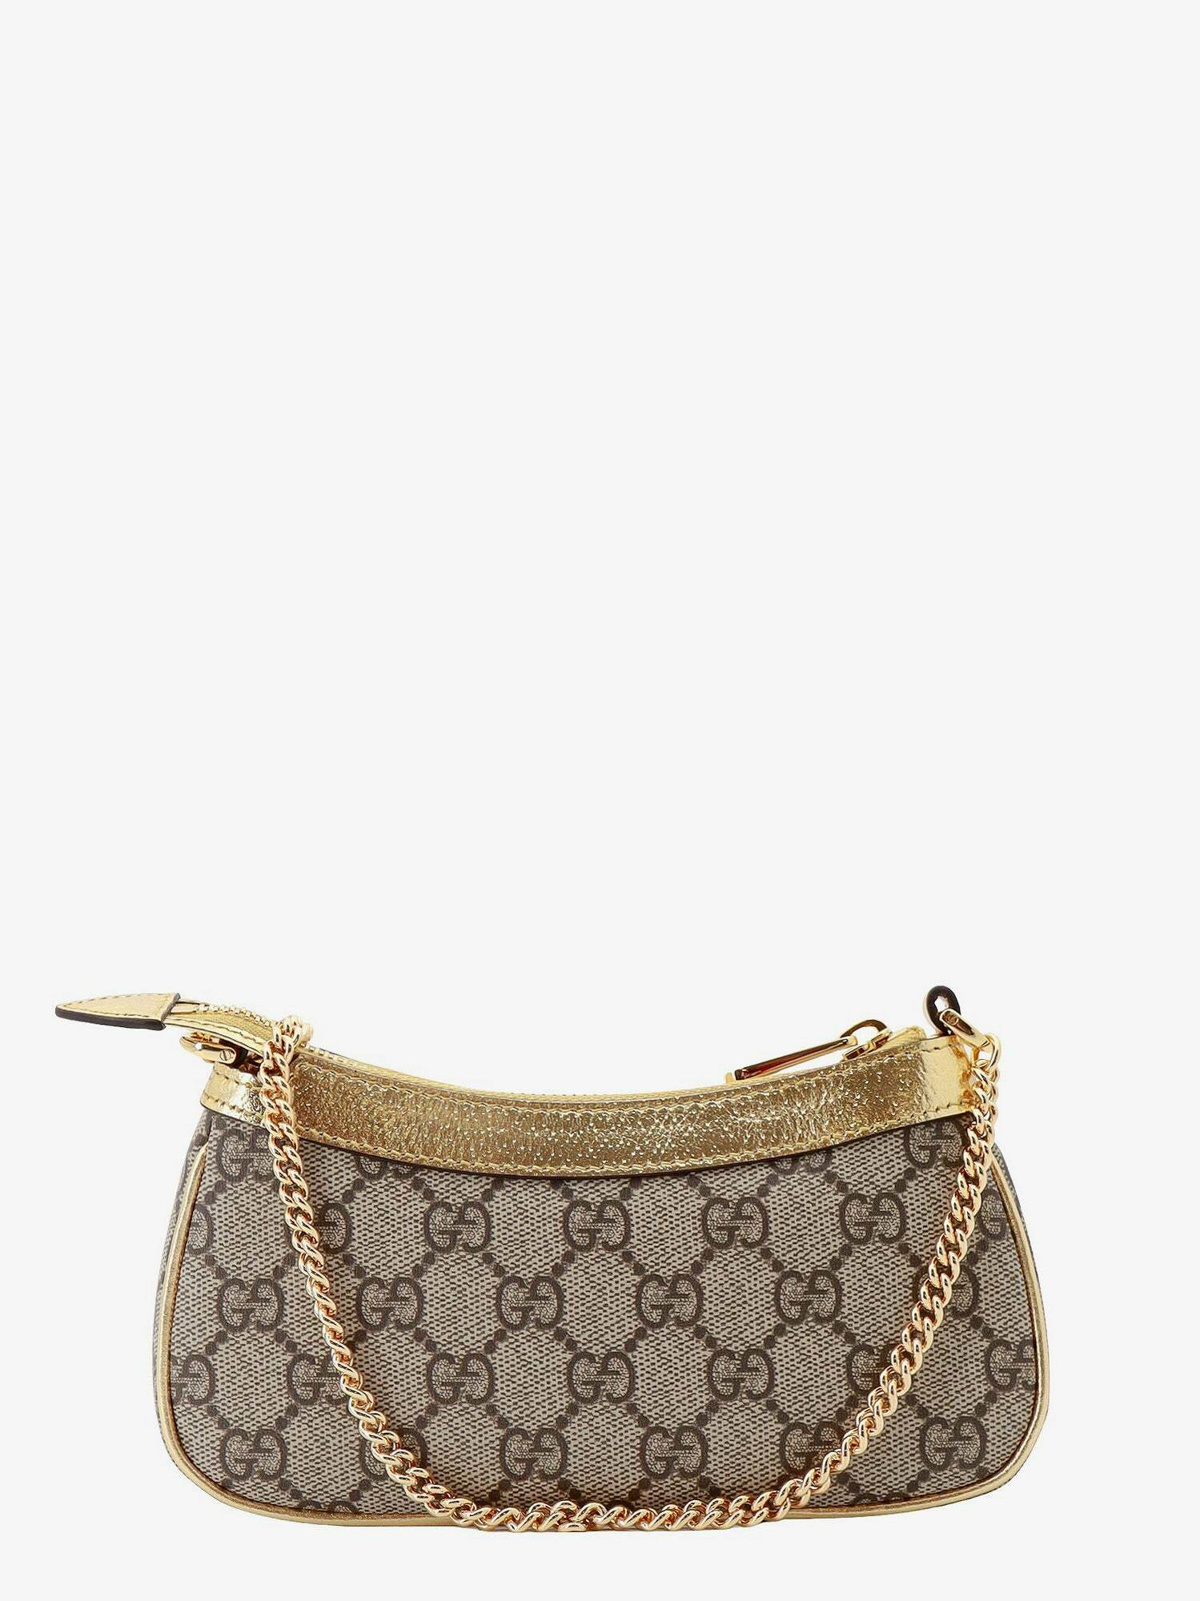 Gucci Bags for women | Buy or Sell your Gucci Bags - Vestiaire Collective